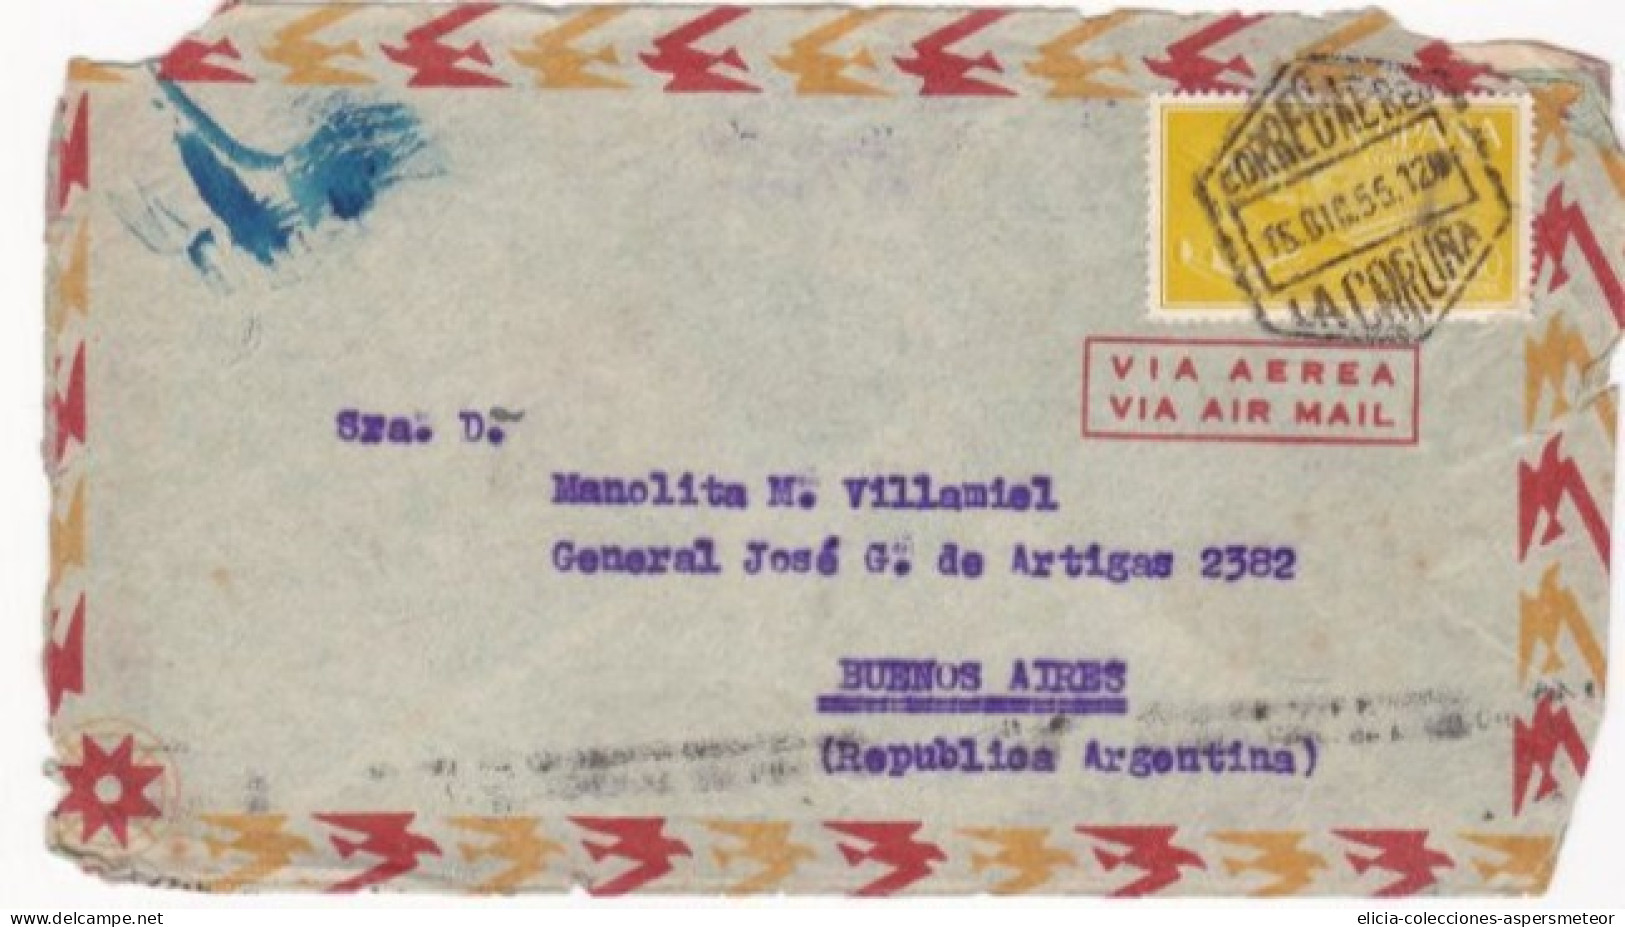 Spain - 1955 - Airmail - Letter - Sent From La Coruña To Buenos Aires, Argentina - Caja 30 - Covers & Documents